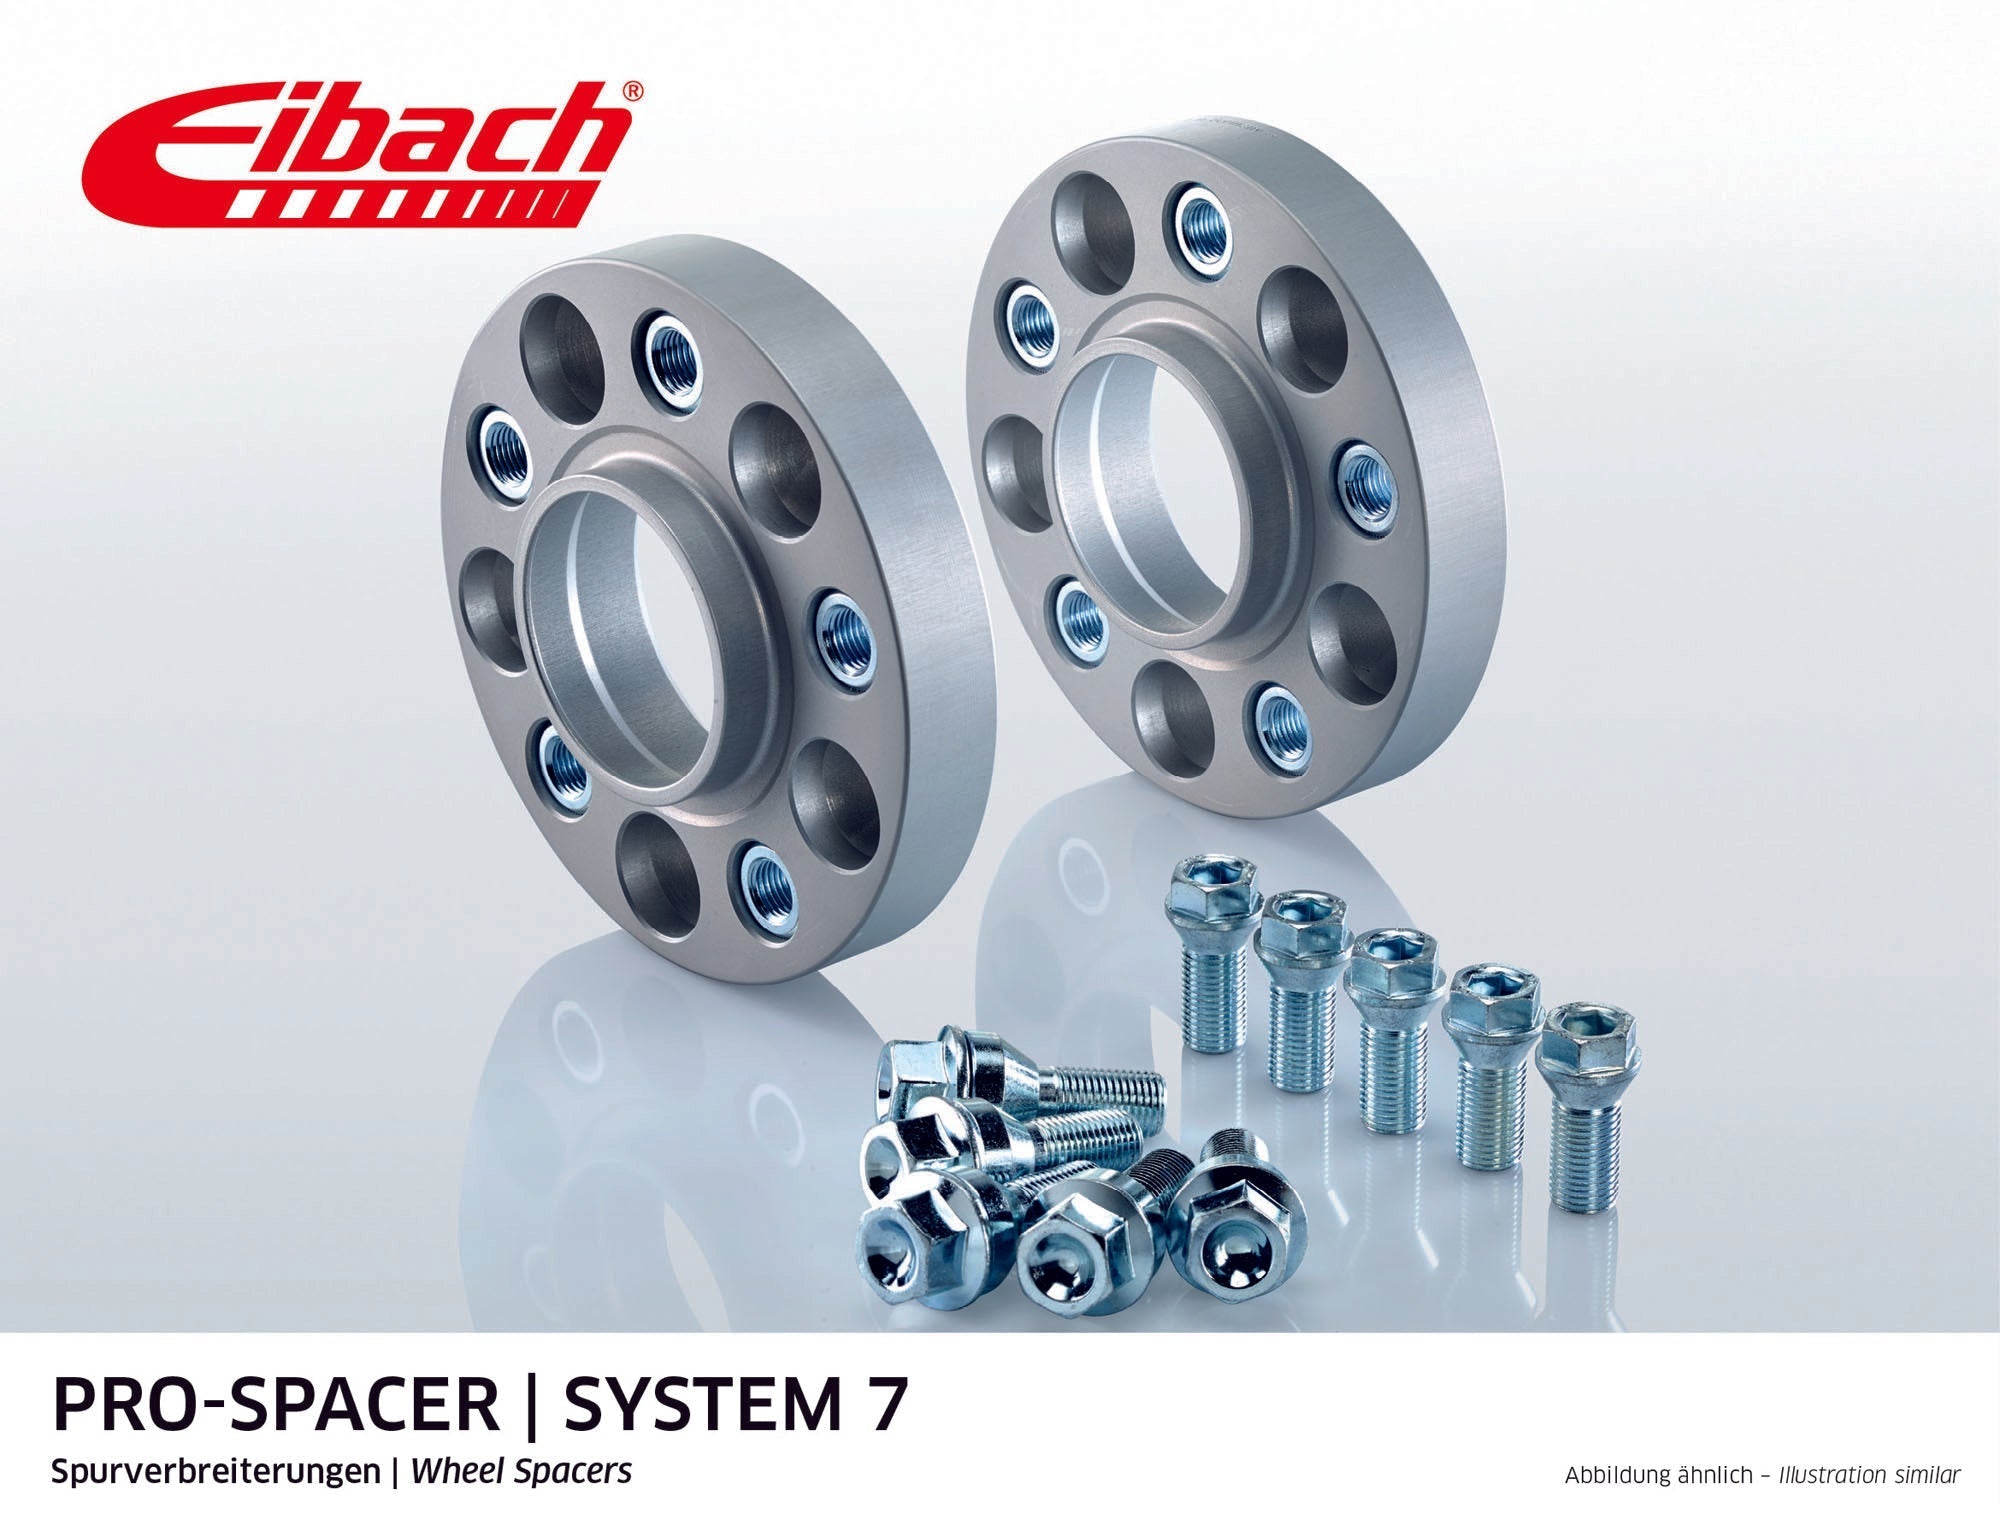 Eibach 23mm Pro-Spacer - Silver Anodized Wheel Spacer CAYENNE 2010-on #S90-7-23-002